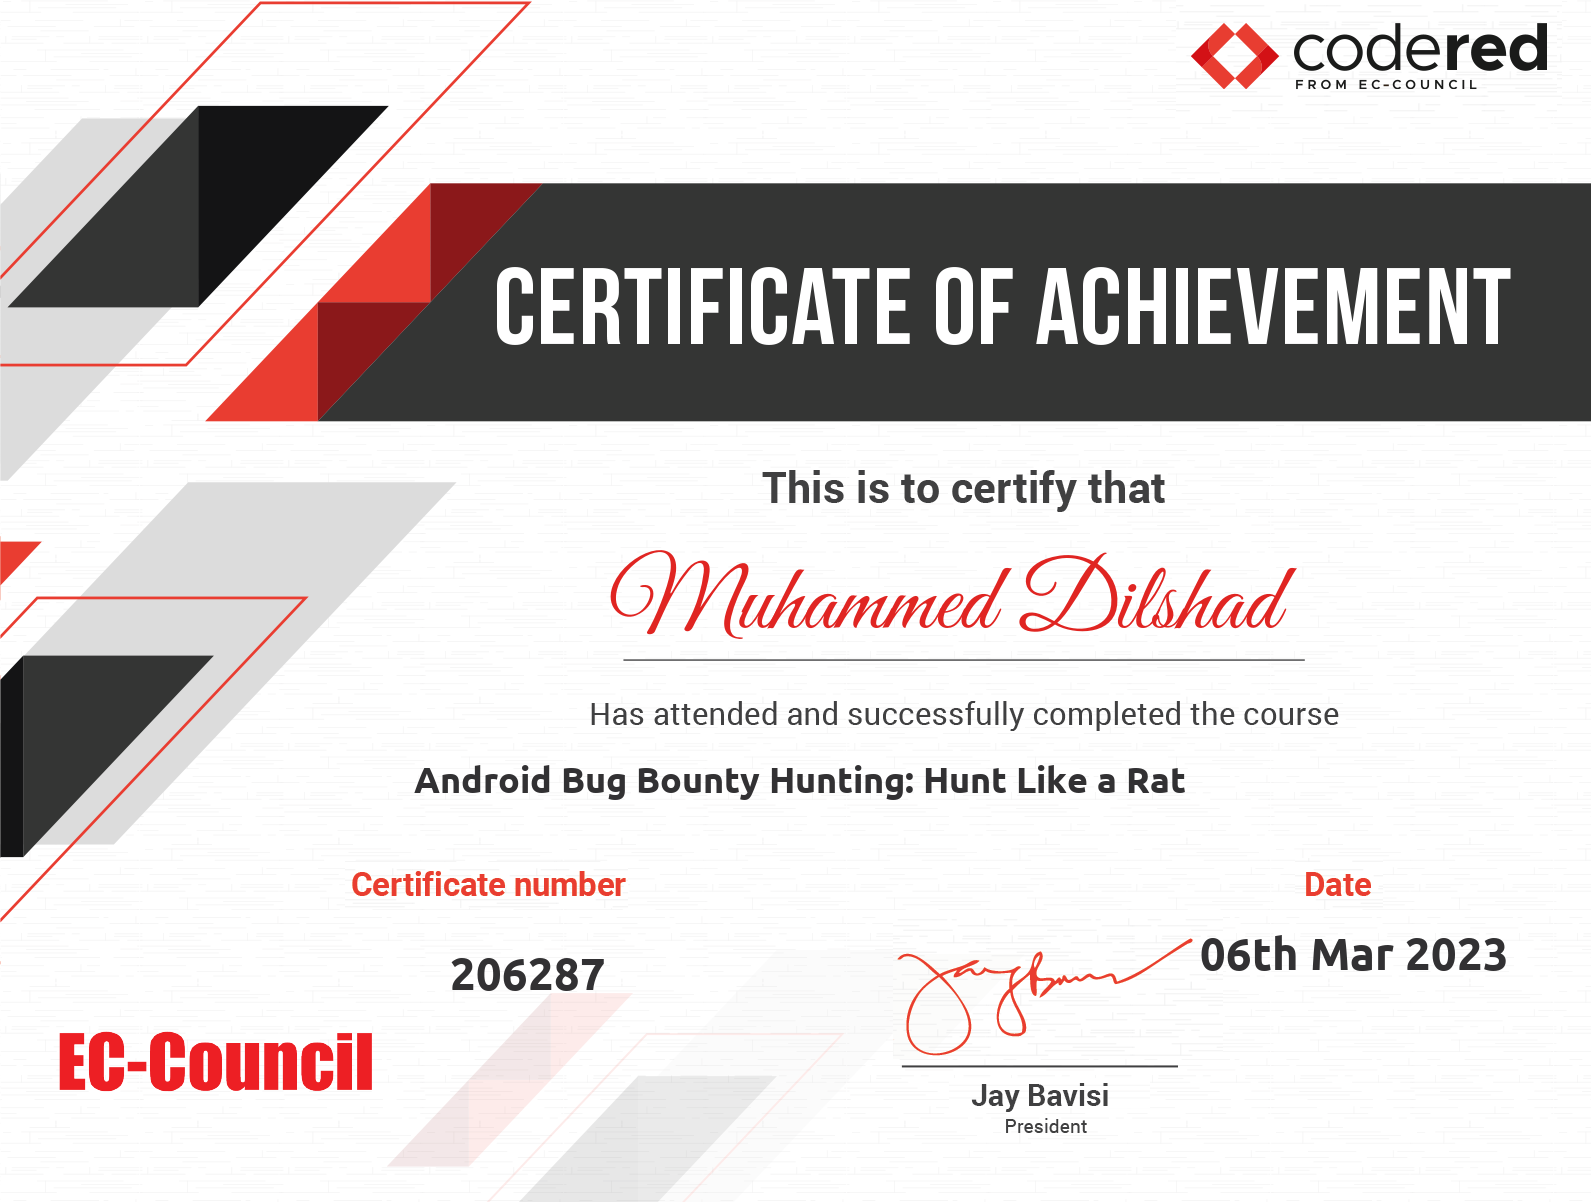 couNciL

&gt; CERTIFICATE OF ACHIEVEMENT

This is to certify that

# O)Nlitemmed Dilstad

Has attended and successfully completed the course
Android Bug Bounty Hunting: Hunt Like a Rat
Certificate number Date

206287 SE Mar 2023

Jay Bavisi

President